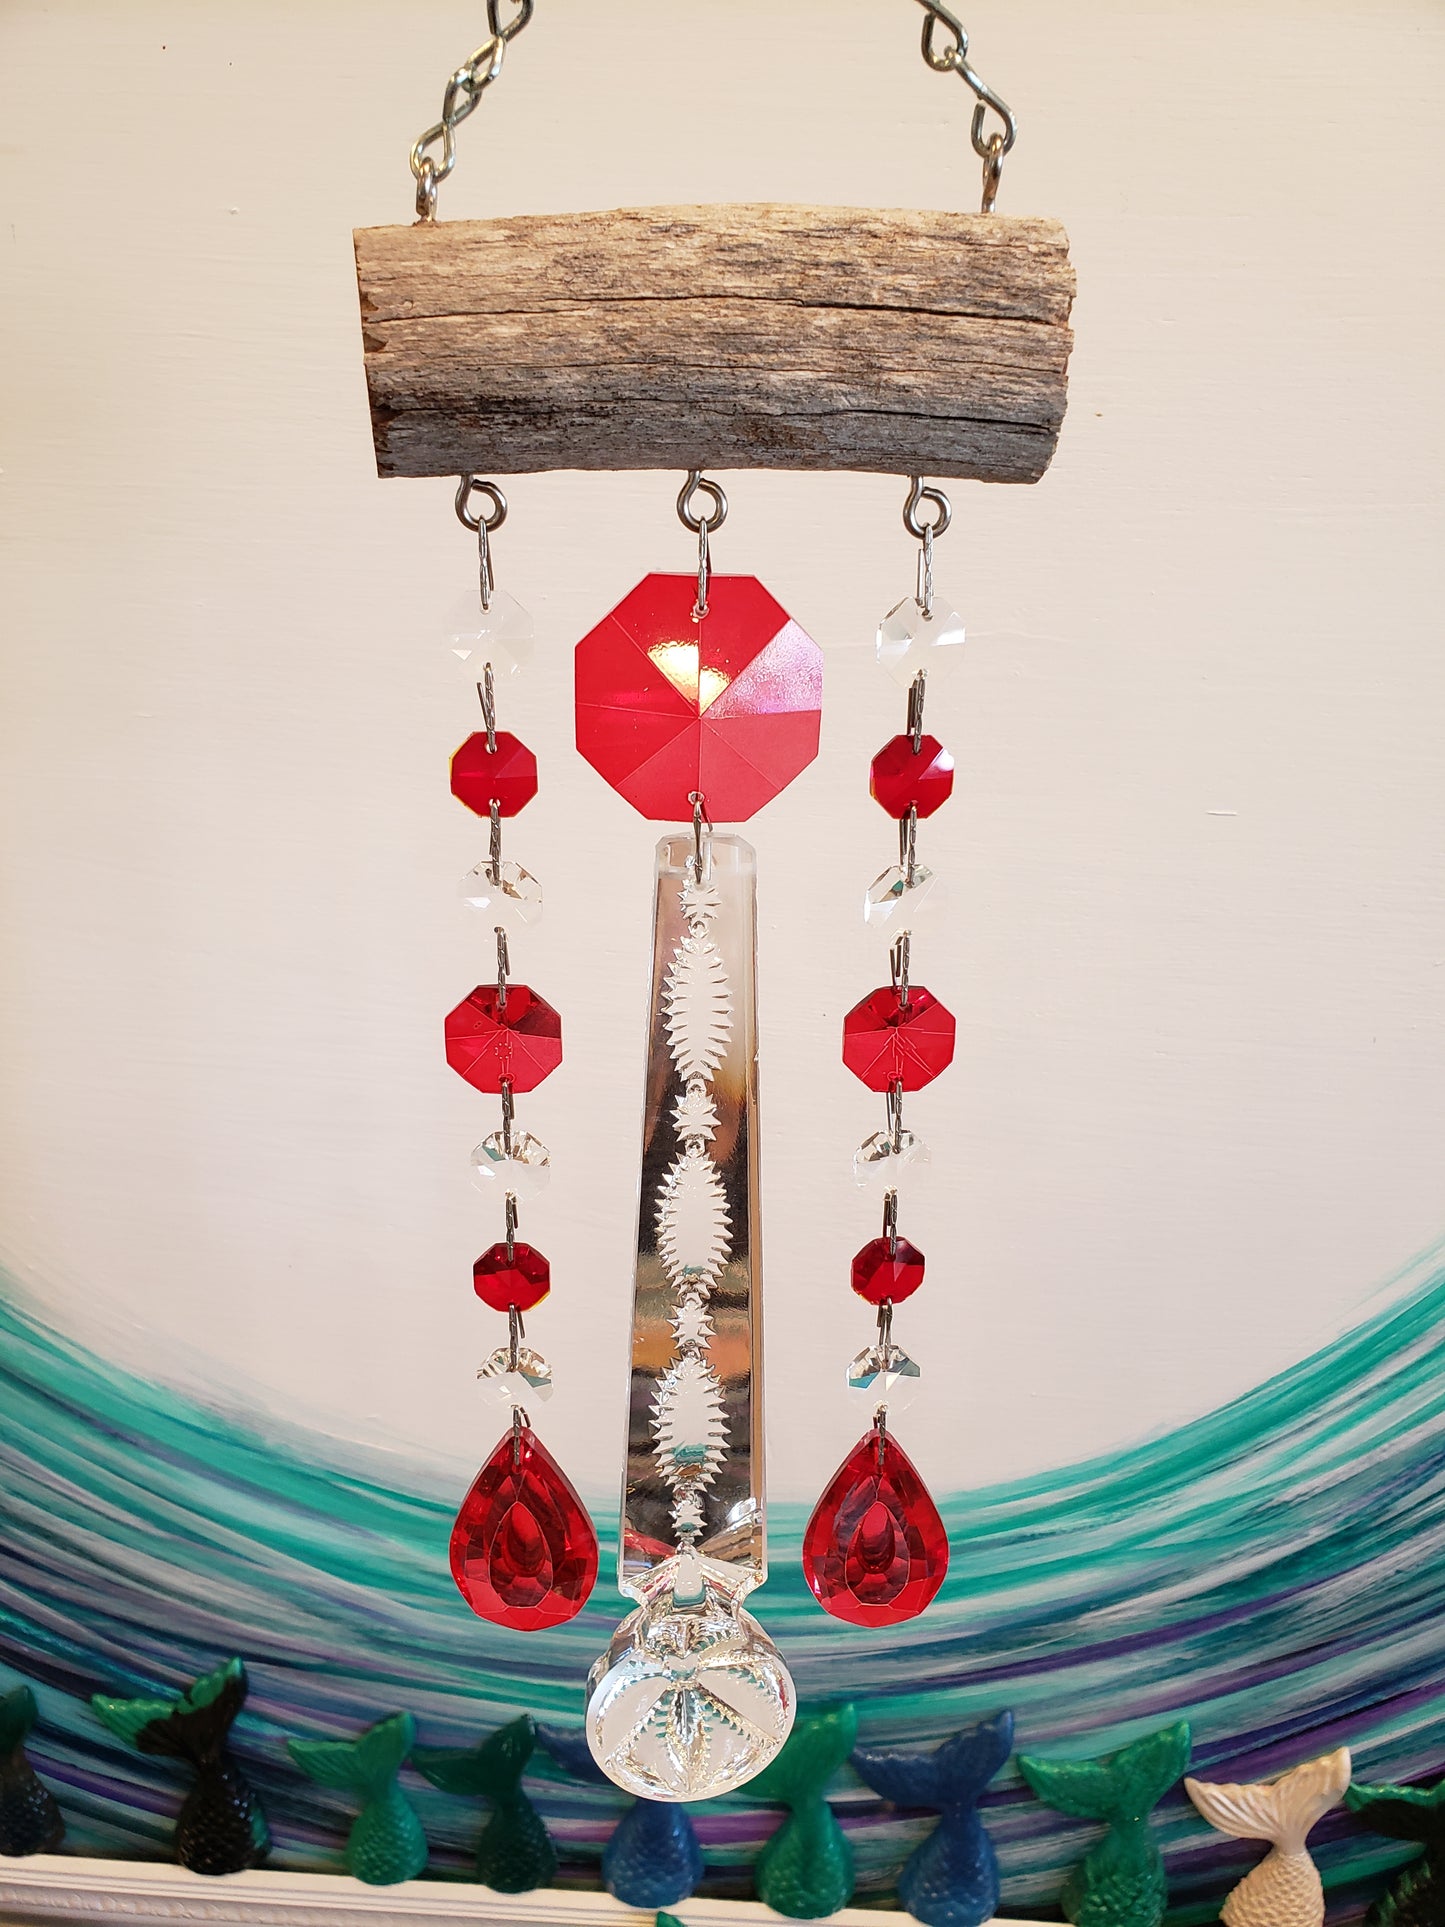 unique handmade gifts, crystal windchime suncatcher by Dazzling Driftwood